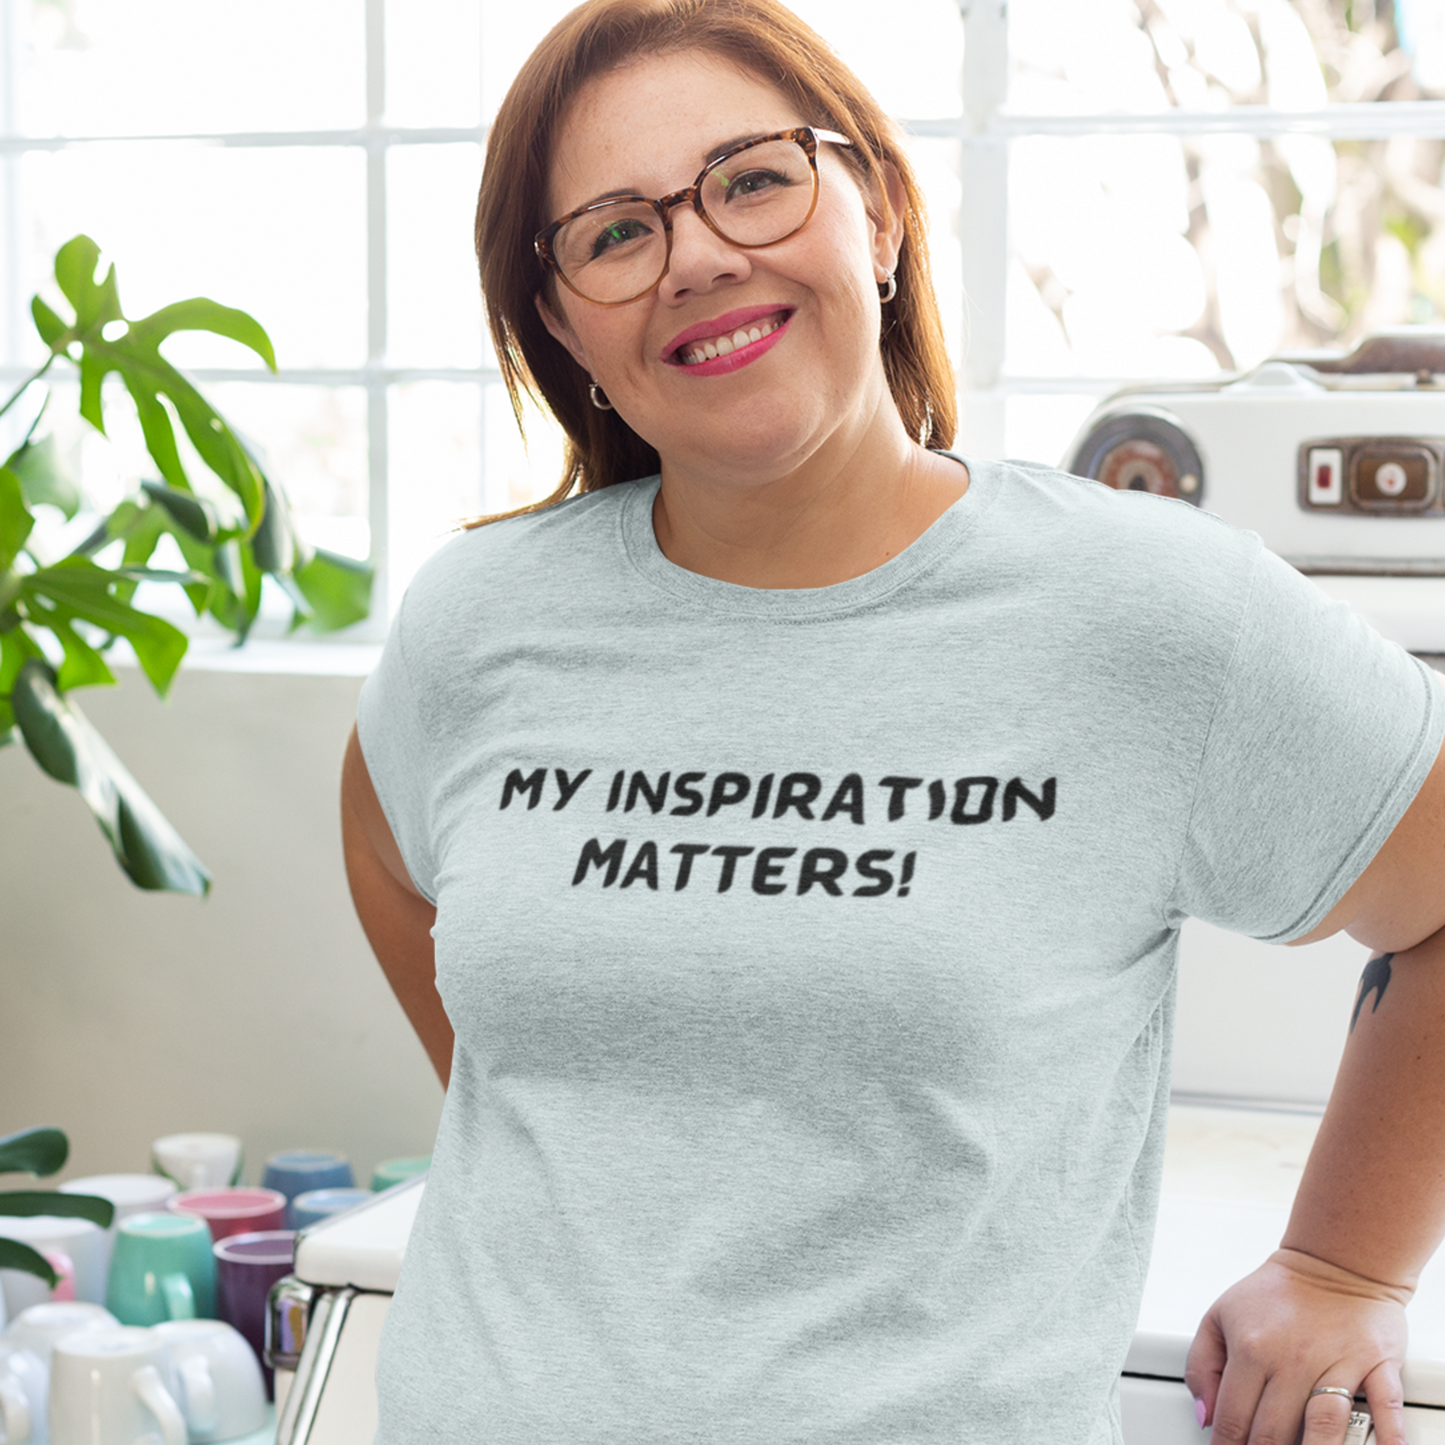 My inspiration matters unisex t shirt, T shirt gift with inspirational words tee shirt gift for friends